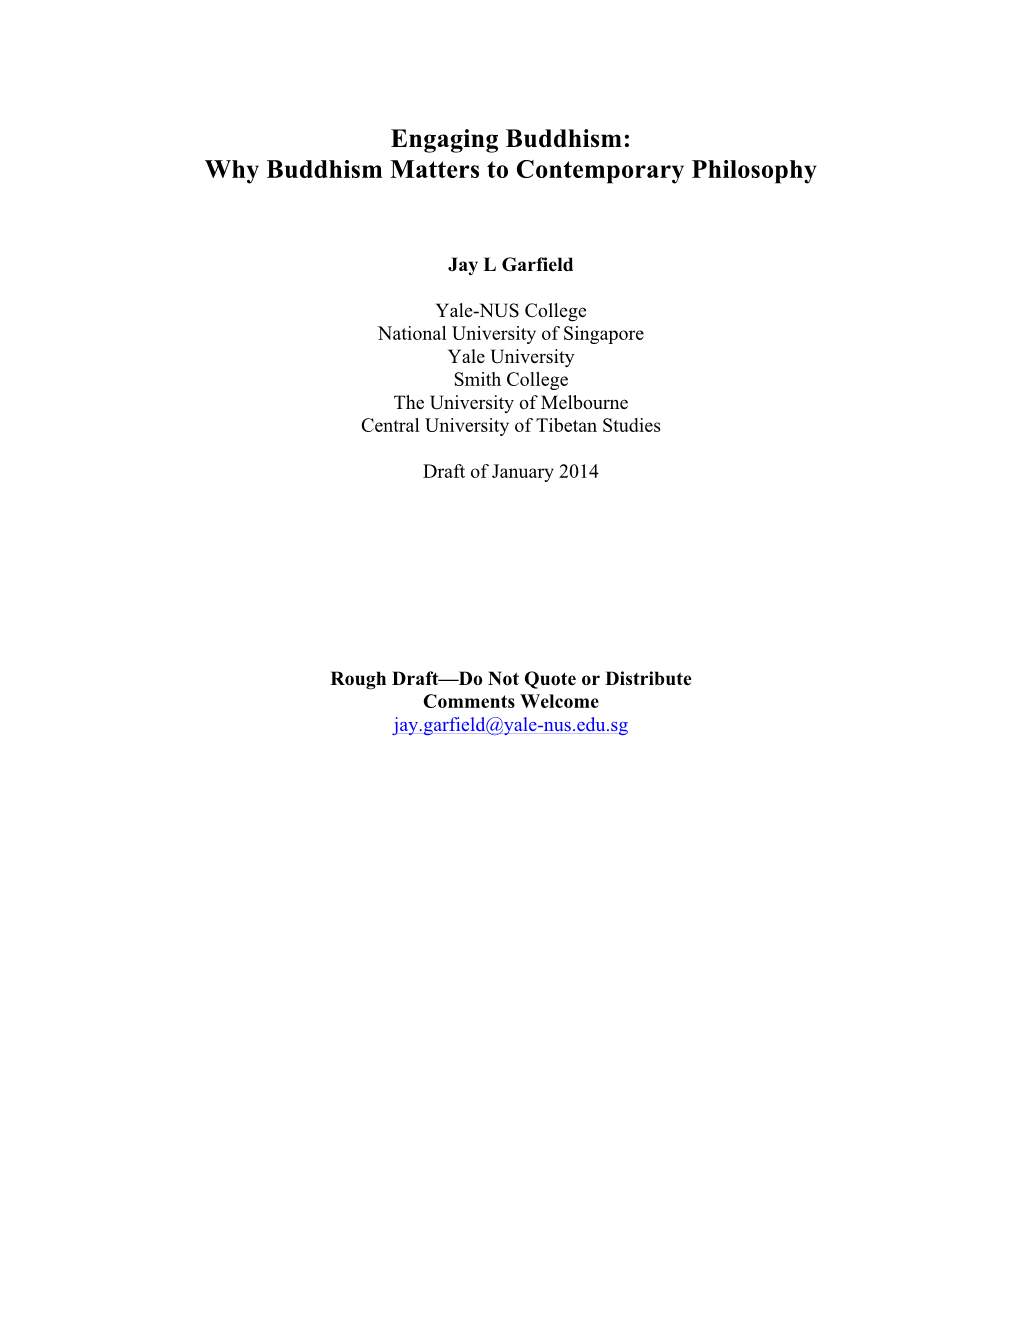 Engaging Buddhism: Why Buddhism Matters to Contemporary Philosophy